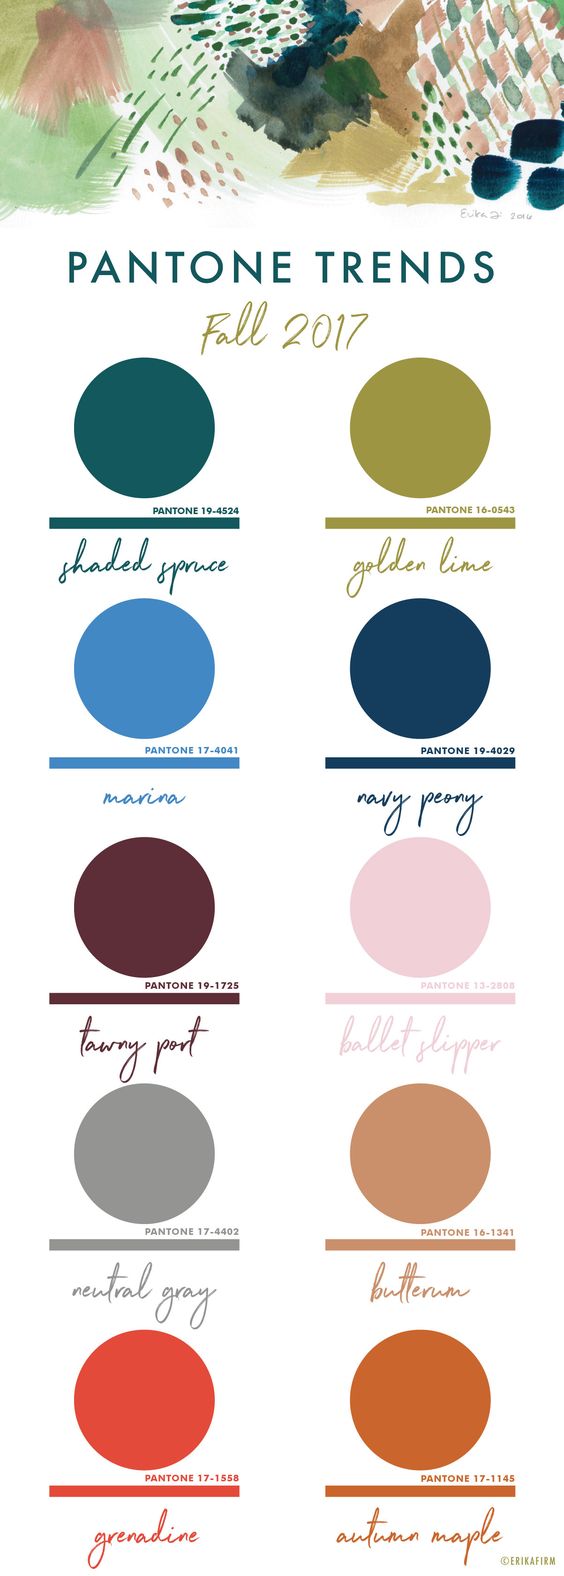 Where do color trends come from? Do they matter?